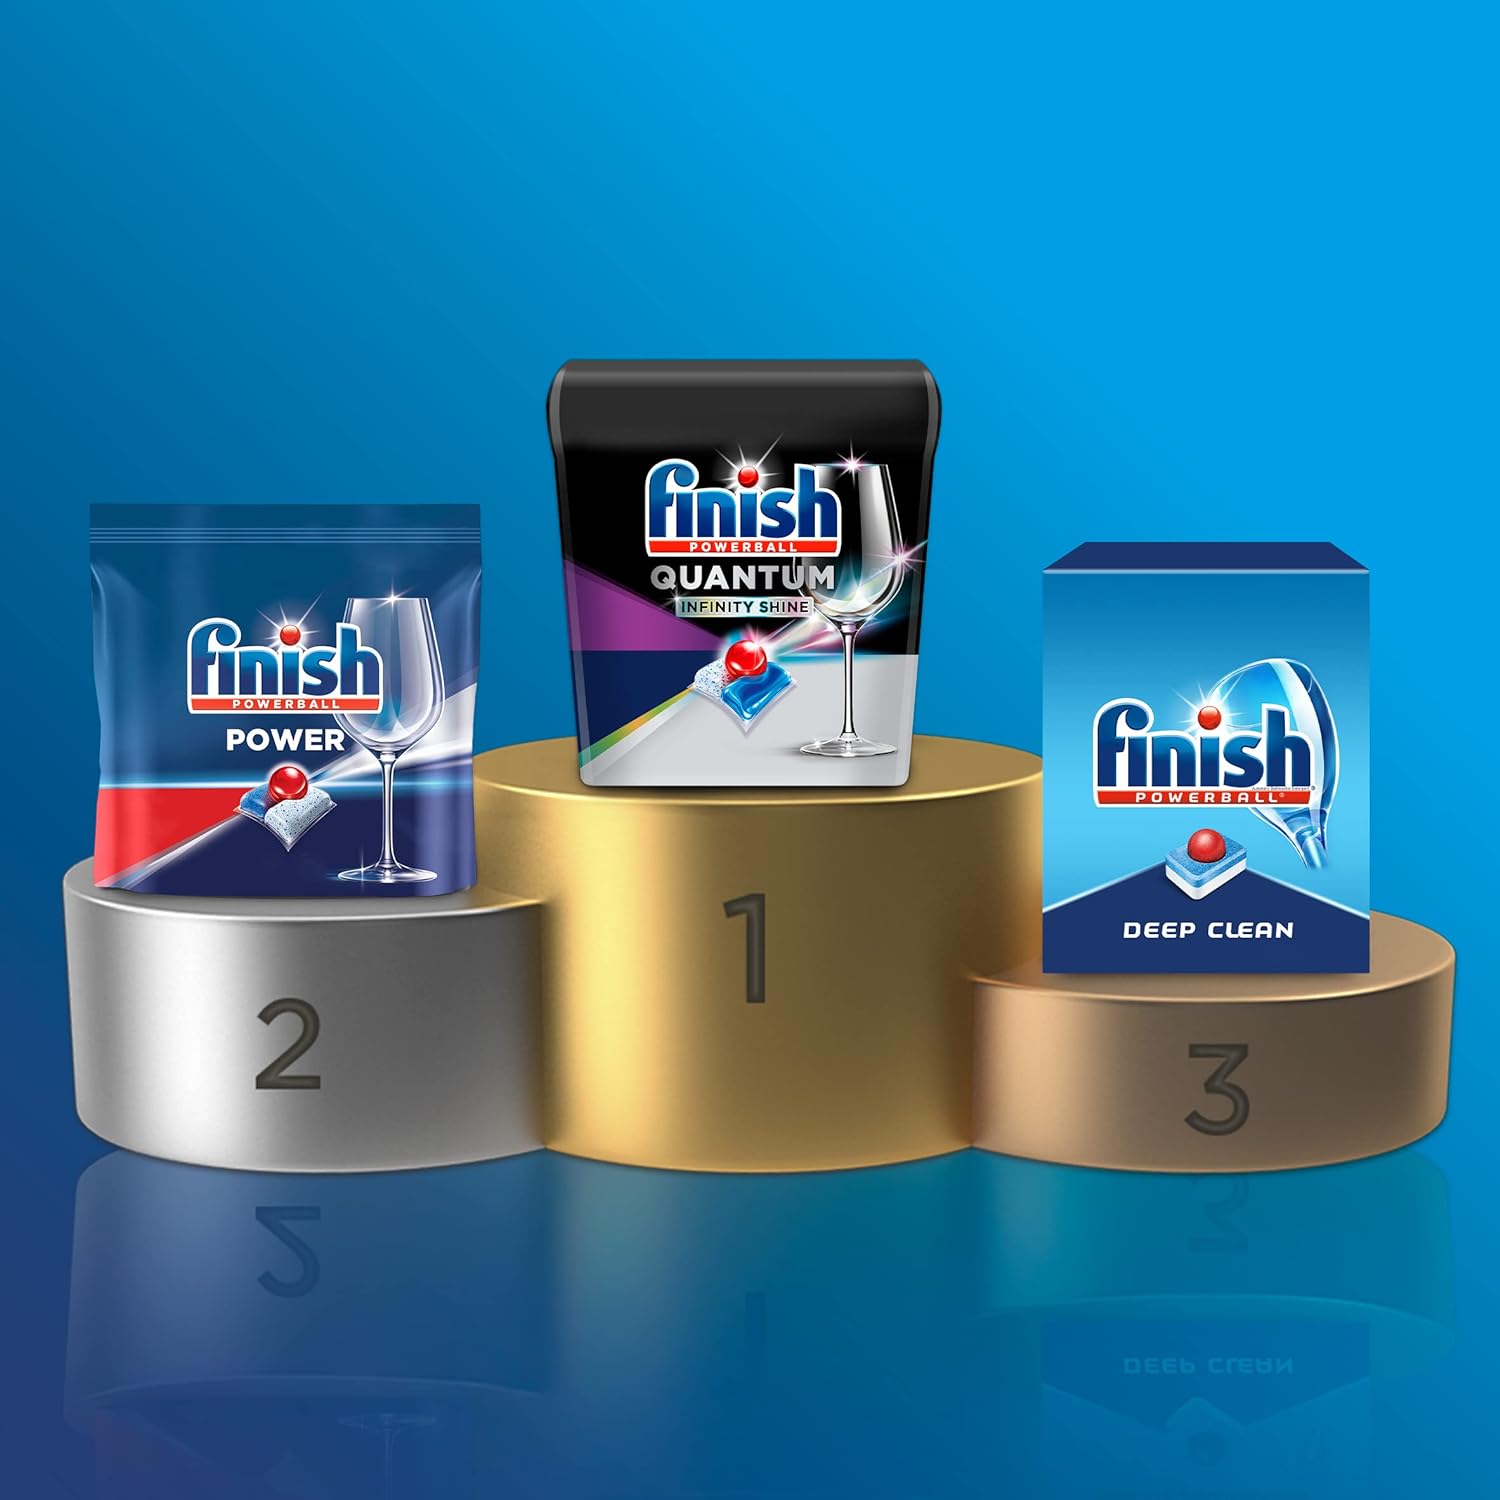 Finish - All in 1 - Dishwasher Detergent - Powerball - Dishwashing Tablets - Dish Tabs - Fresh Scent, 94 Count (Pack of 1) - Packaging May Vary : Health & Household